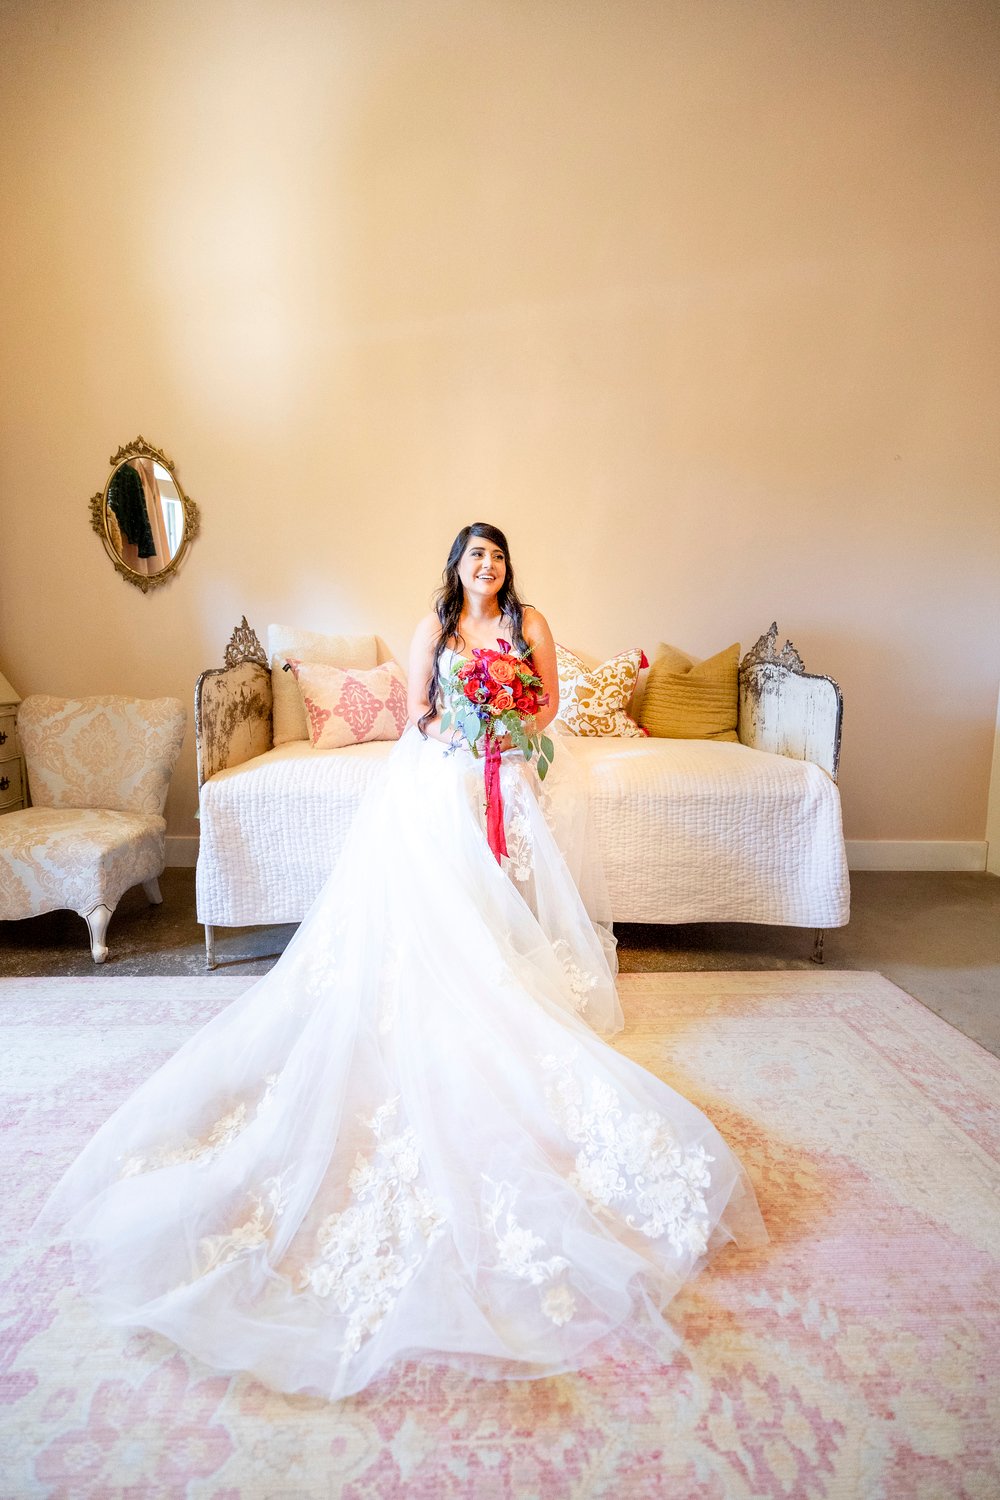 Bride smiling while holding her bouquet and sitting on a day bed